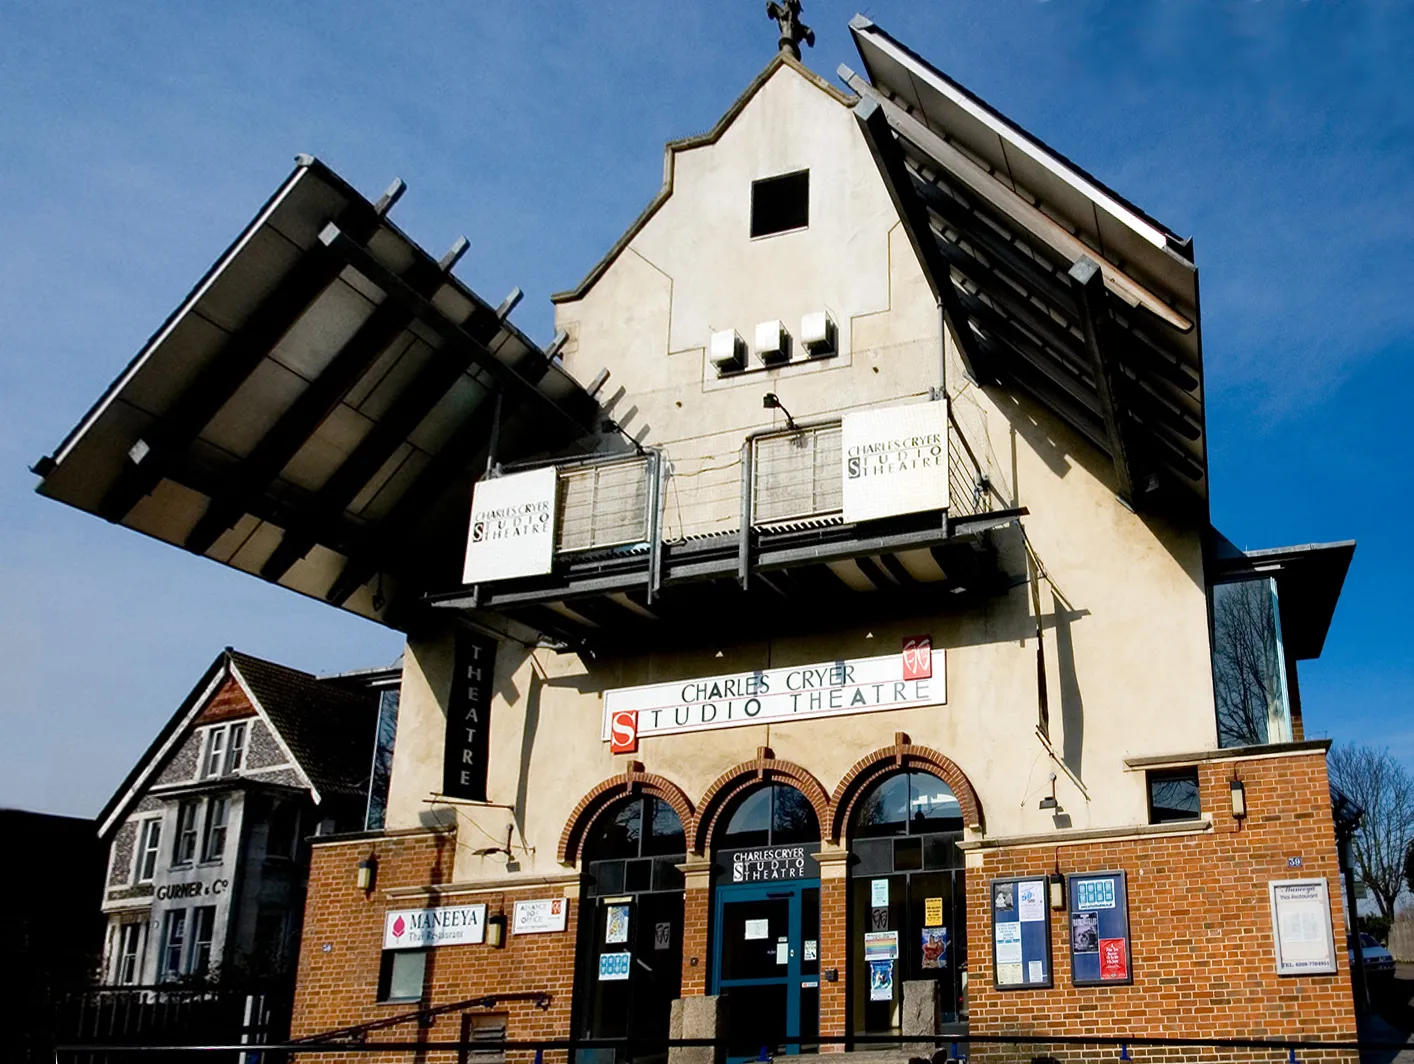 Photo showing: The Charles Cryer Studio Theatre, Carshalton. This was originally built in the 1870's as a public hall. The building has also been used as a roller-skating rink and a cinema. It became the present theatre in 1991. The building also incorporates a good Thai restaurant (Maneeya) at ground level, which is entered from the side of the building and hence not fully in view.